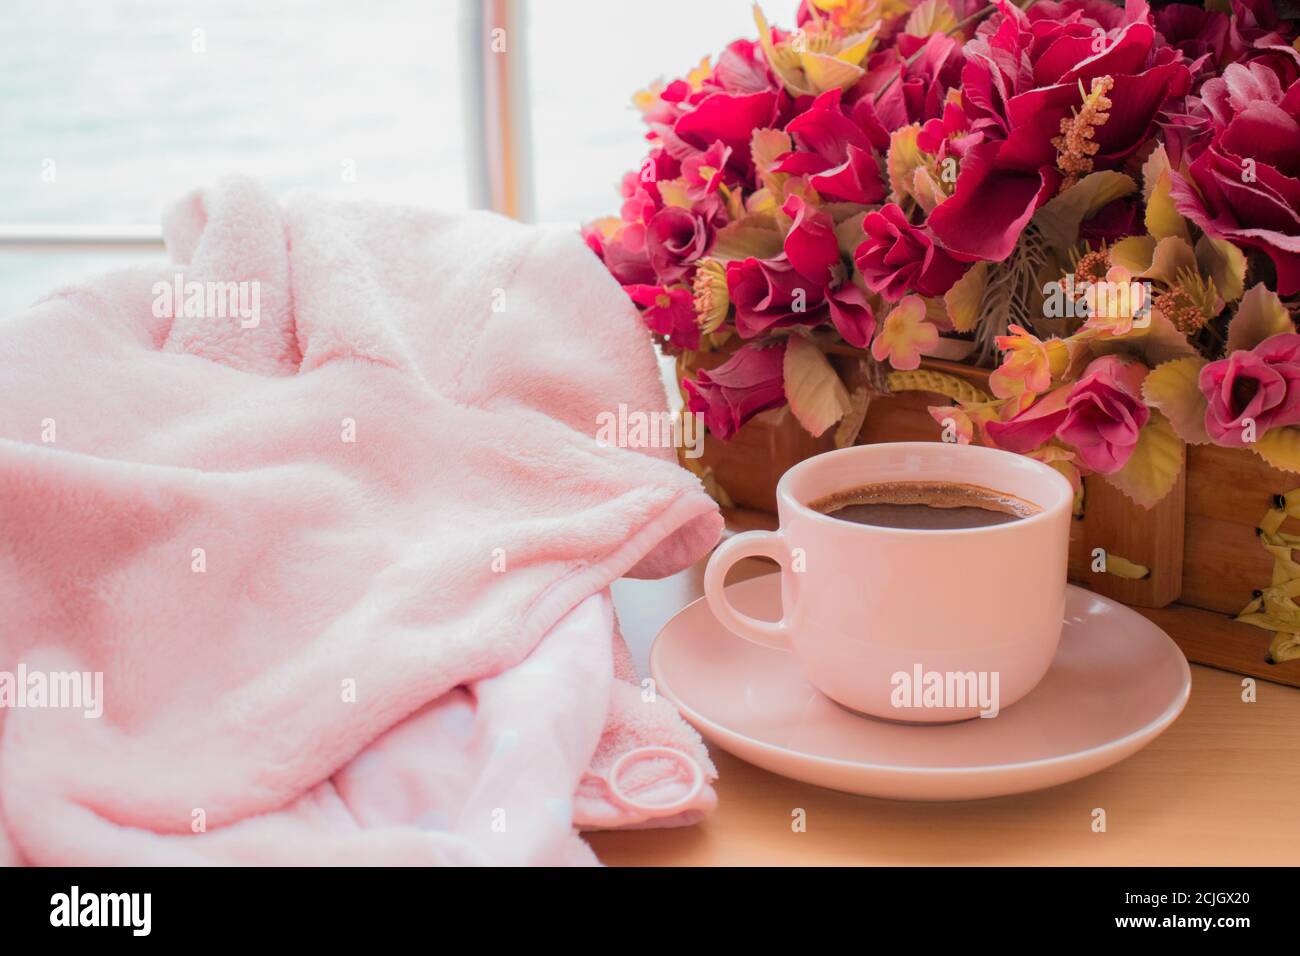 PINK COFFEE – A great day starts with YOU and Pink Coffee.